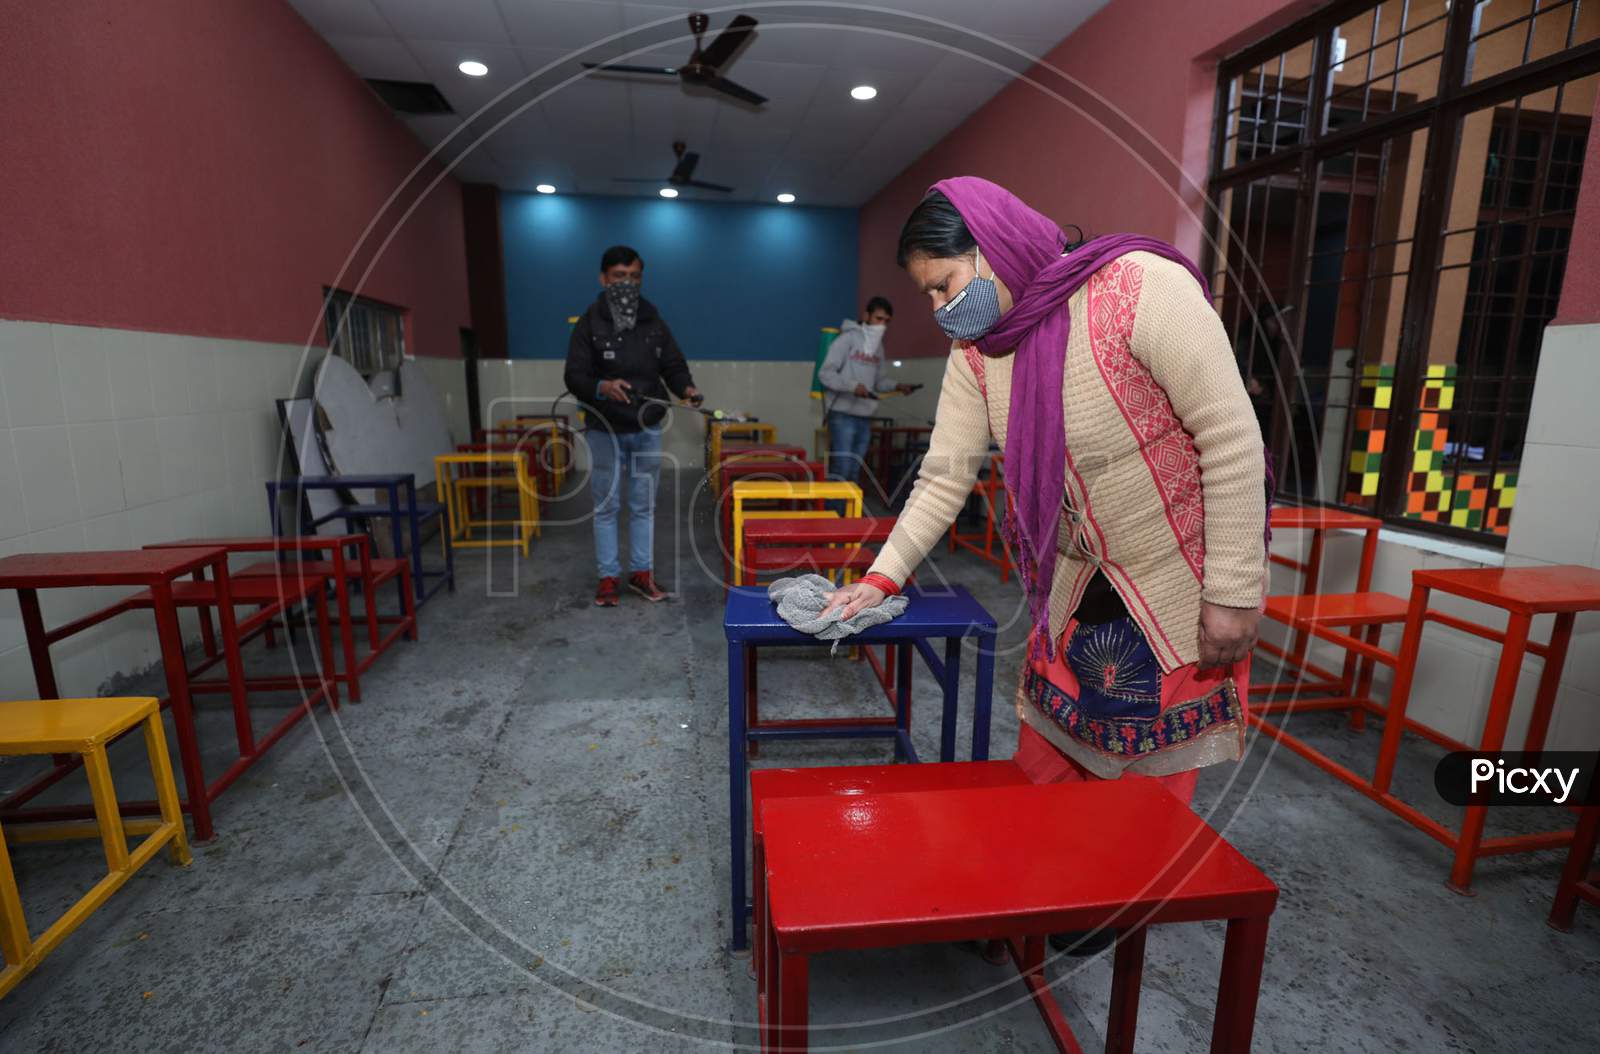 Preparations underway at a school in Jammu ahead of reopening of educational institutions next week after over 10 months closure due to Coronavirus pandemic. 28,Jan,2021.